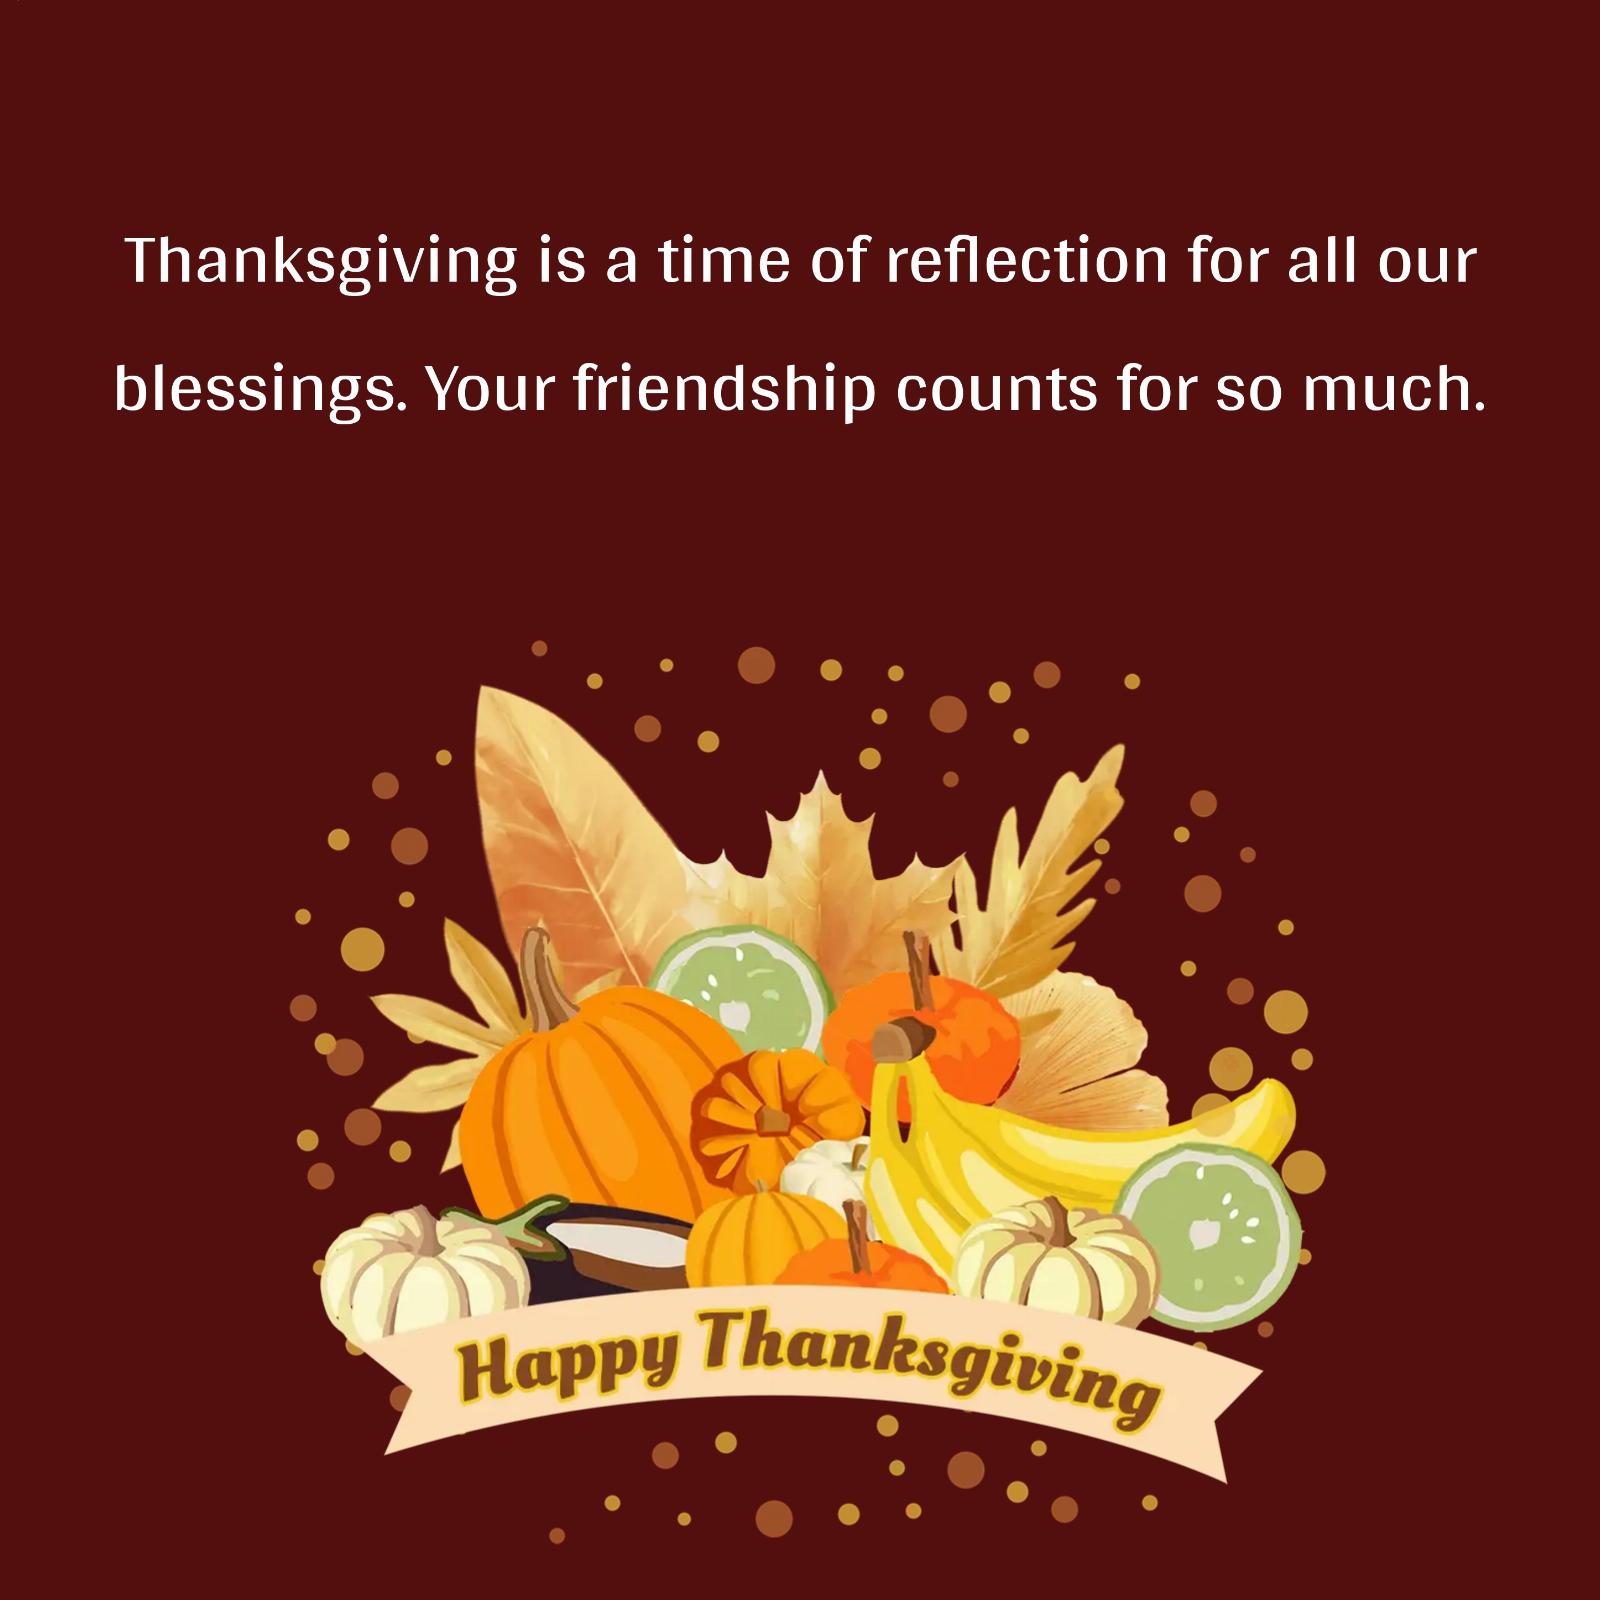 Thanksgiving is a time of reflection for all our blessings